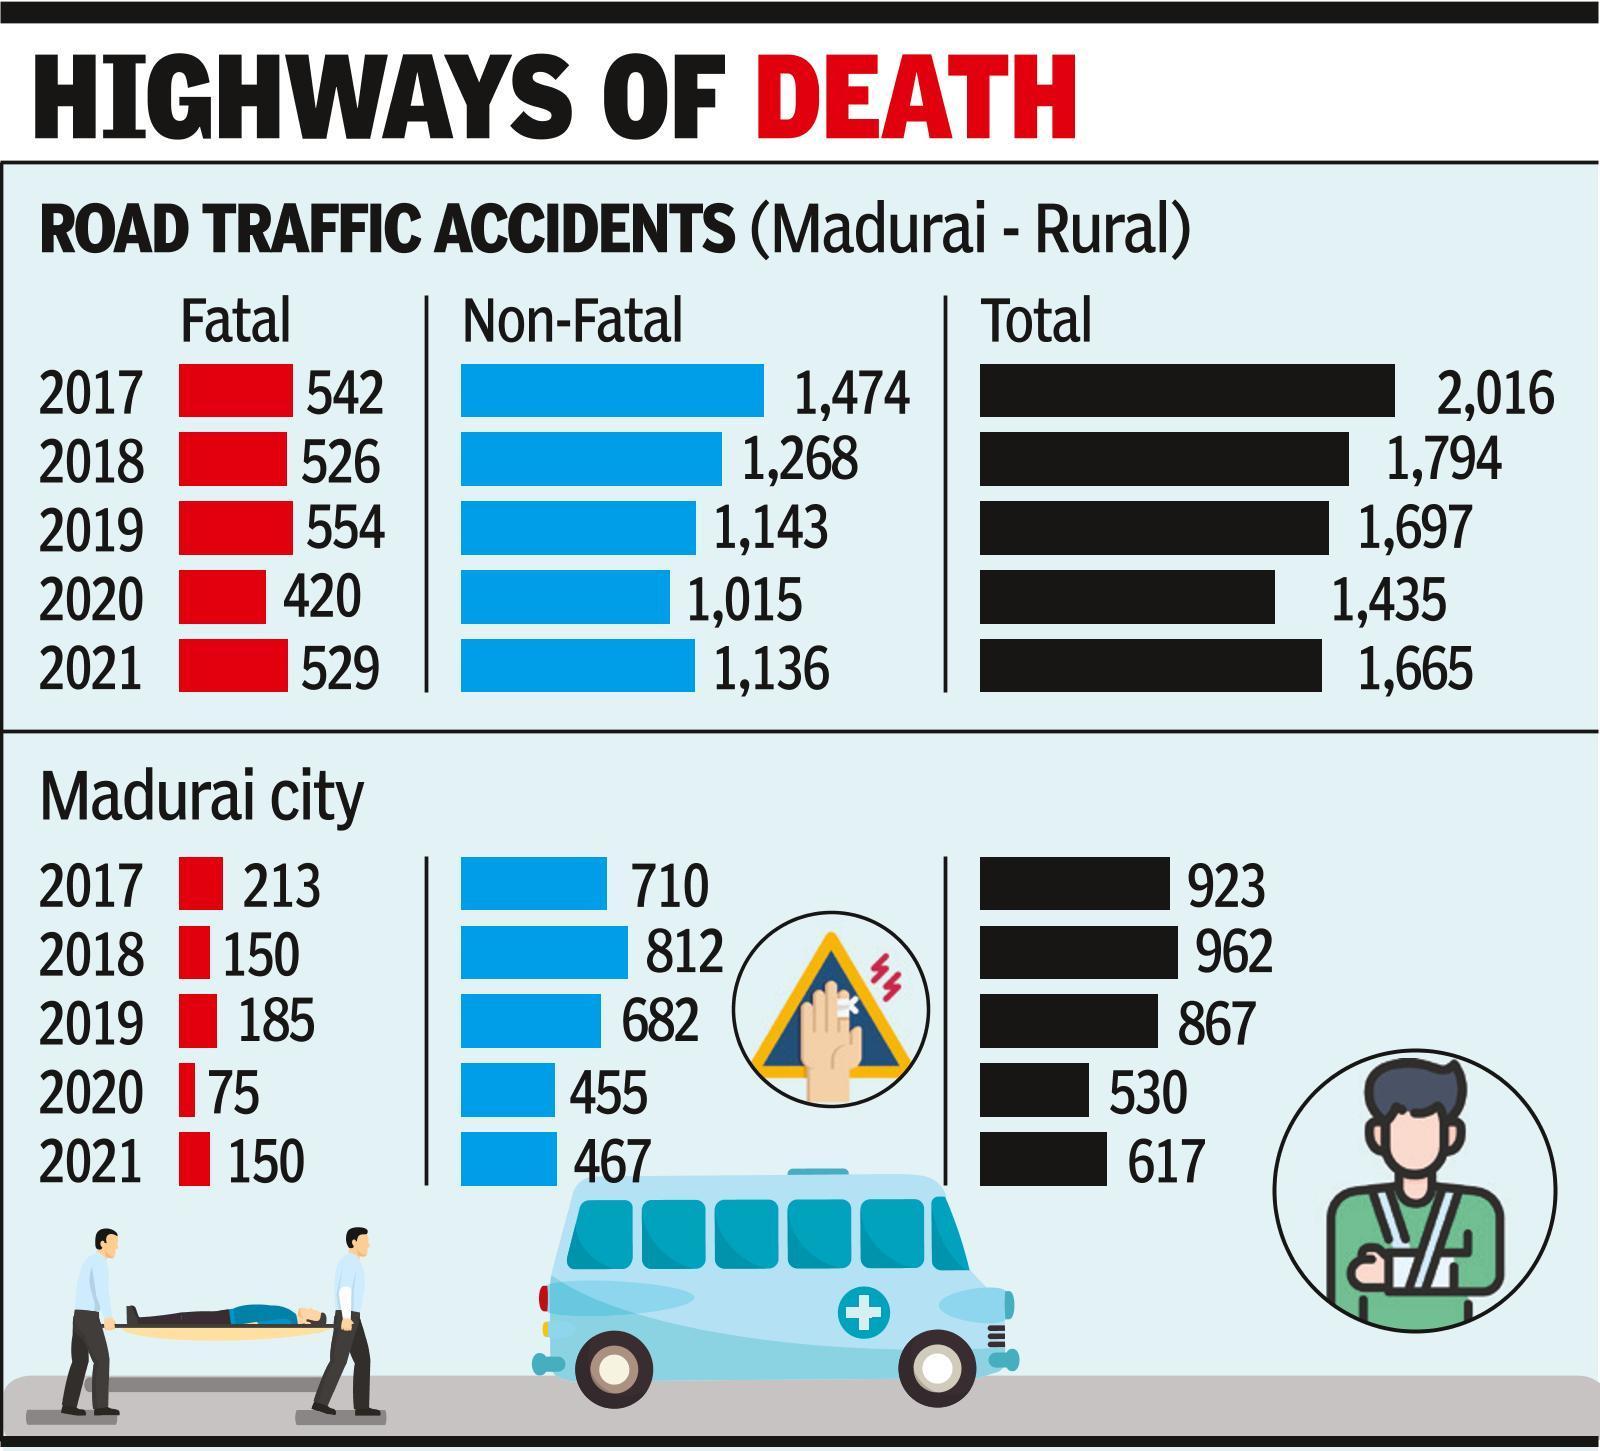 Over 80% of road accidents in Madurai happen on highways